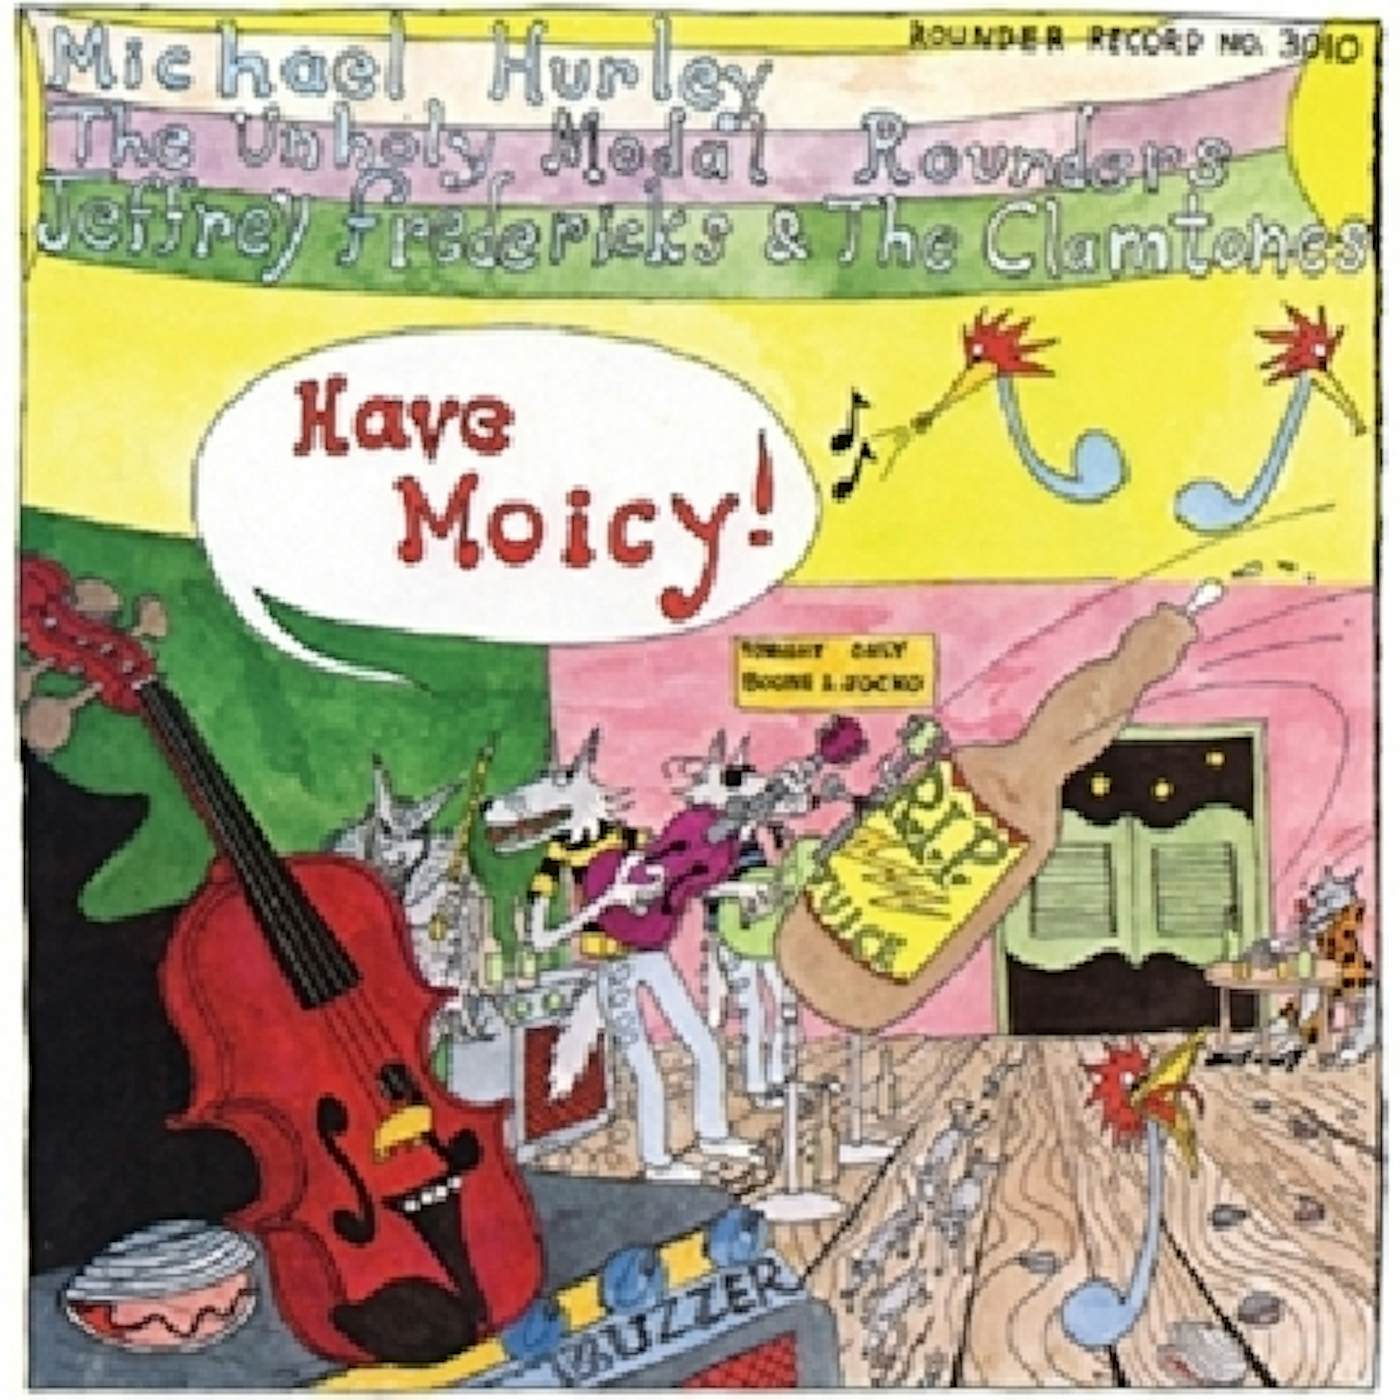 Michael Hurley HAVE MOICY Vinyl Record